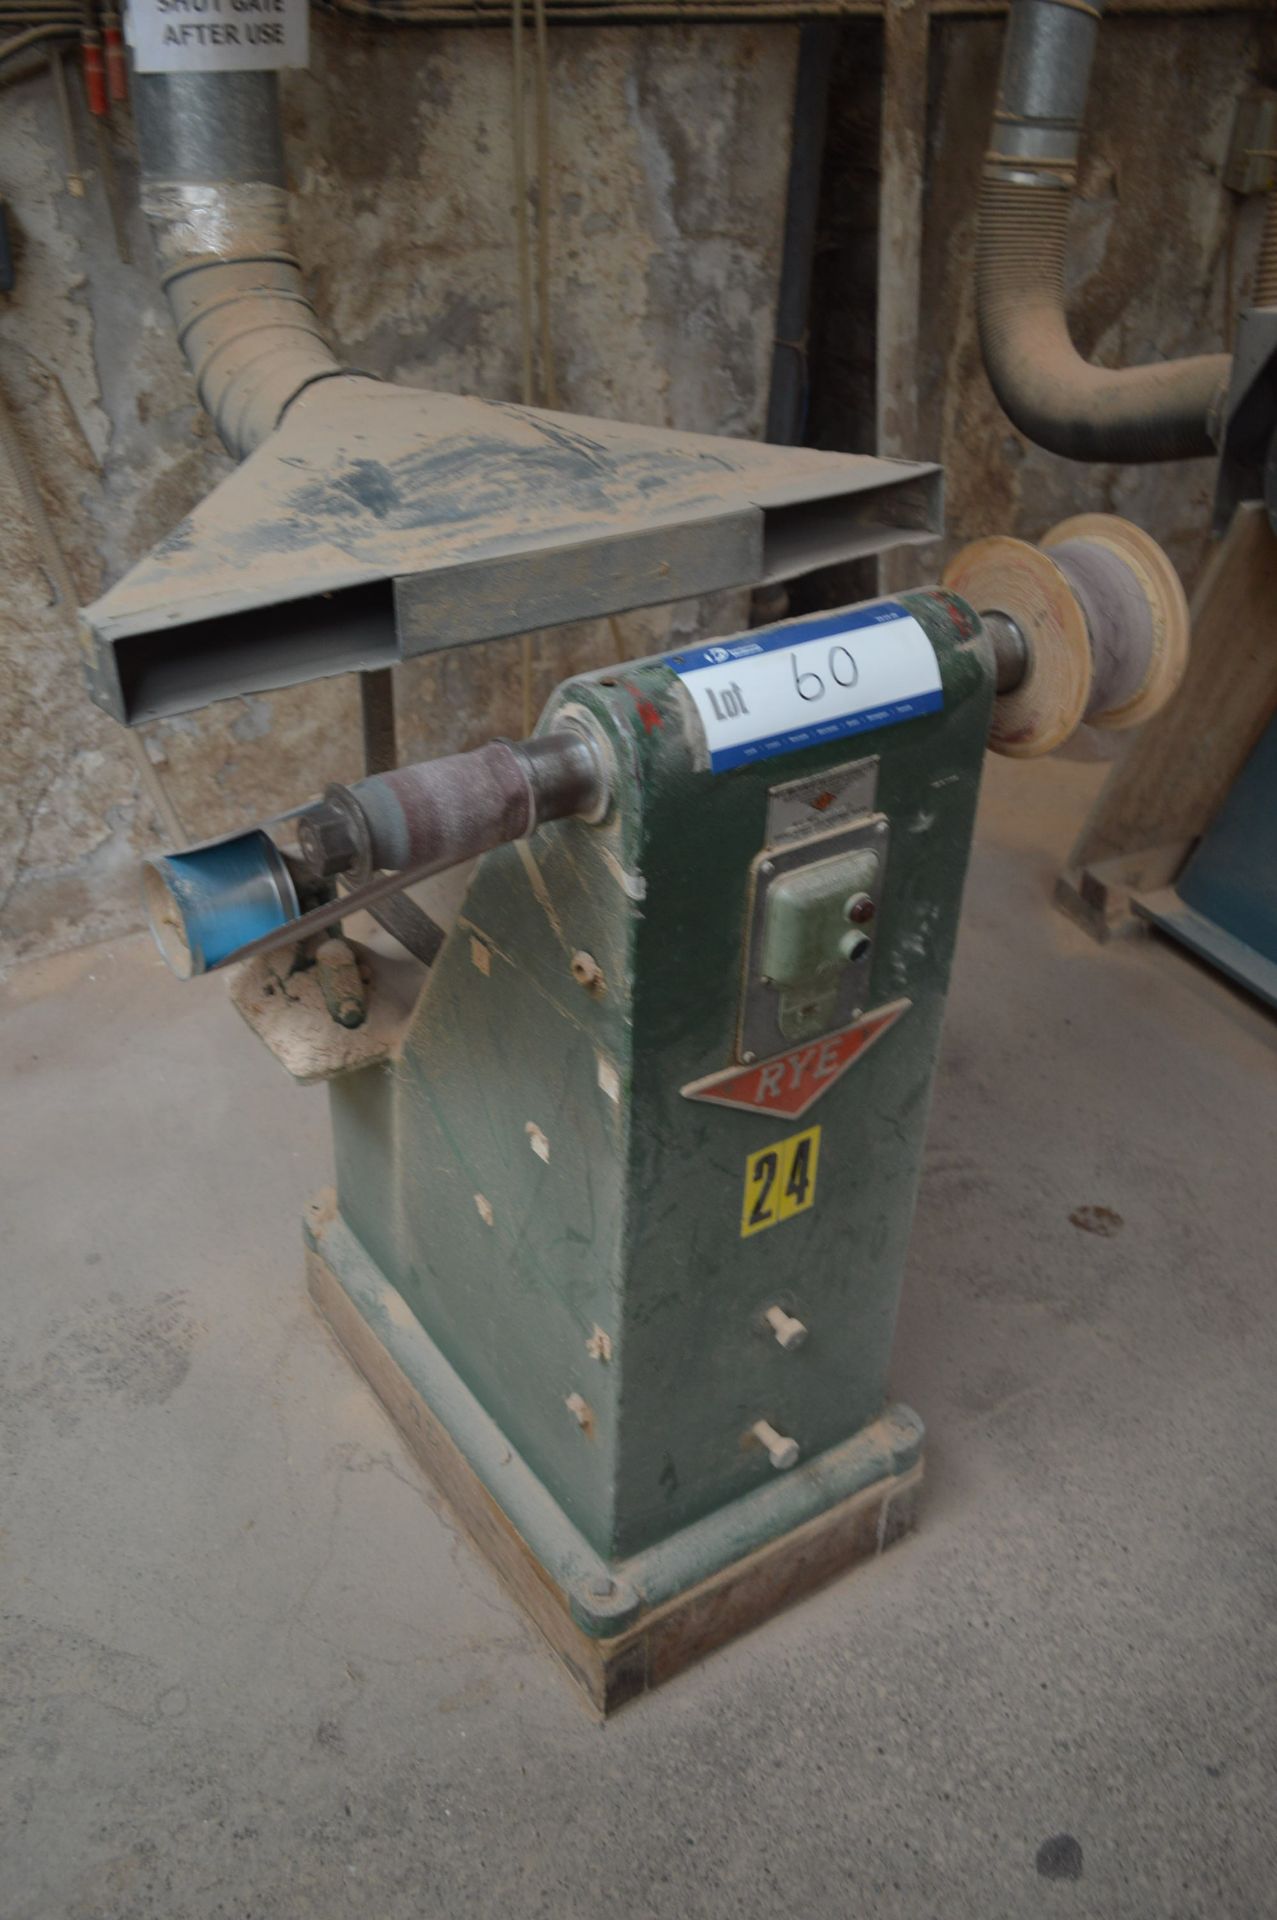 RYE BS/4 DOUBLE ENDED SPINDLE, serial no. 202, with immediate ducting